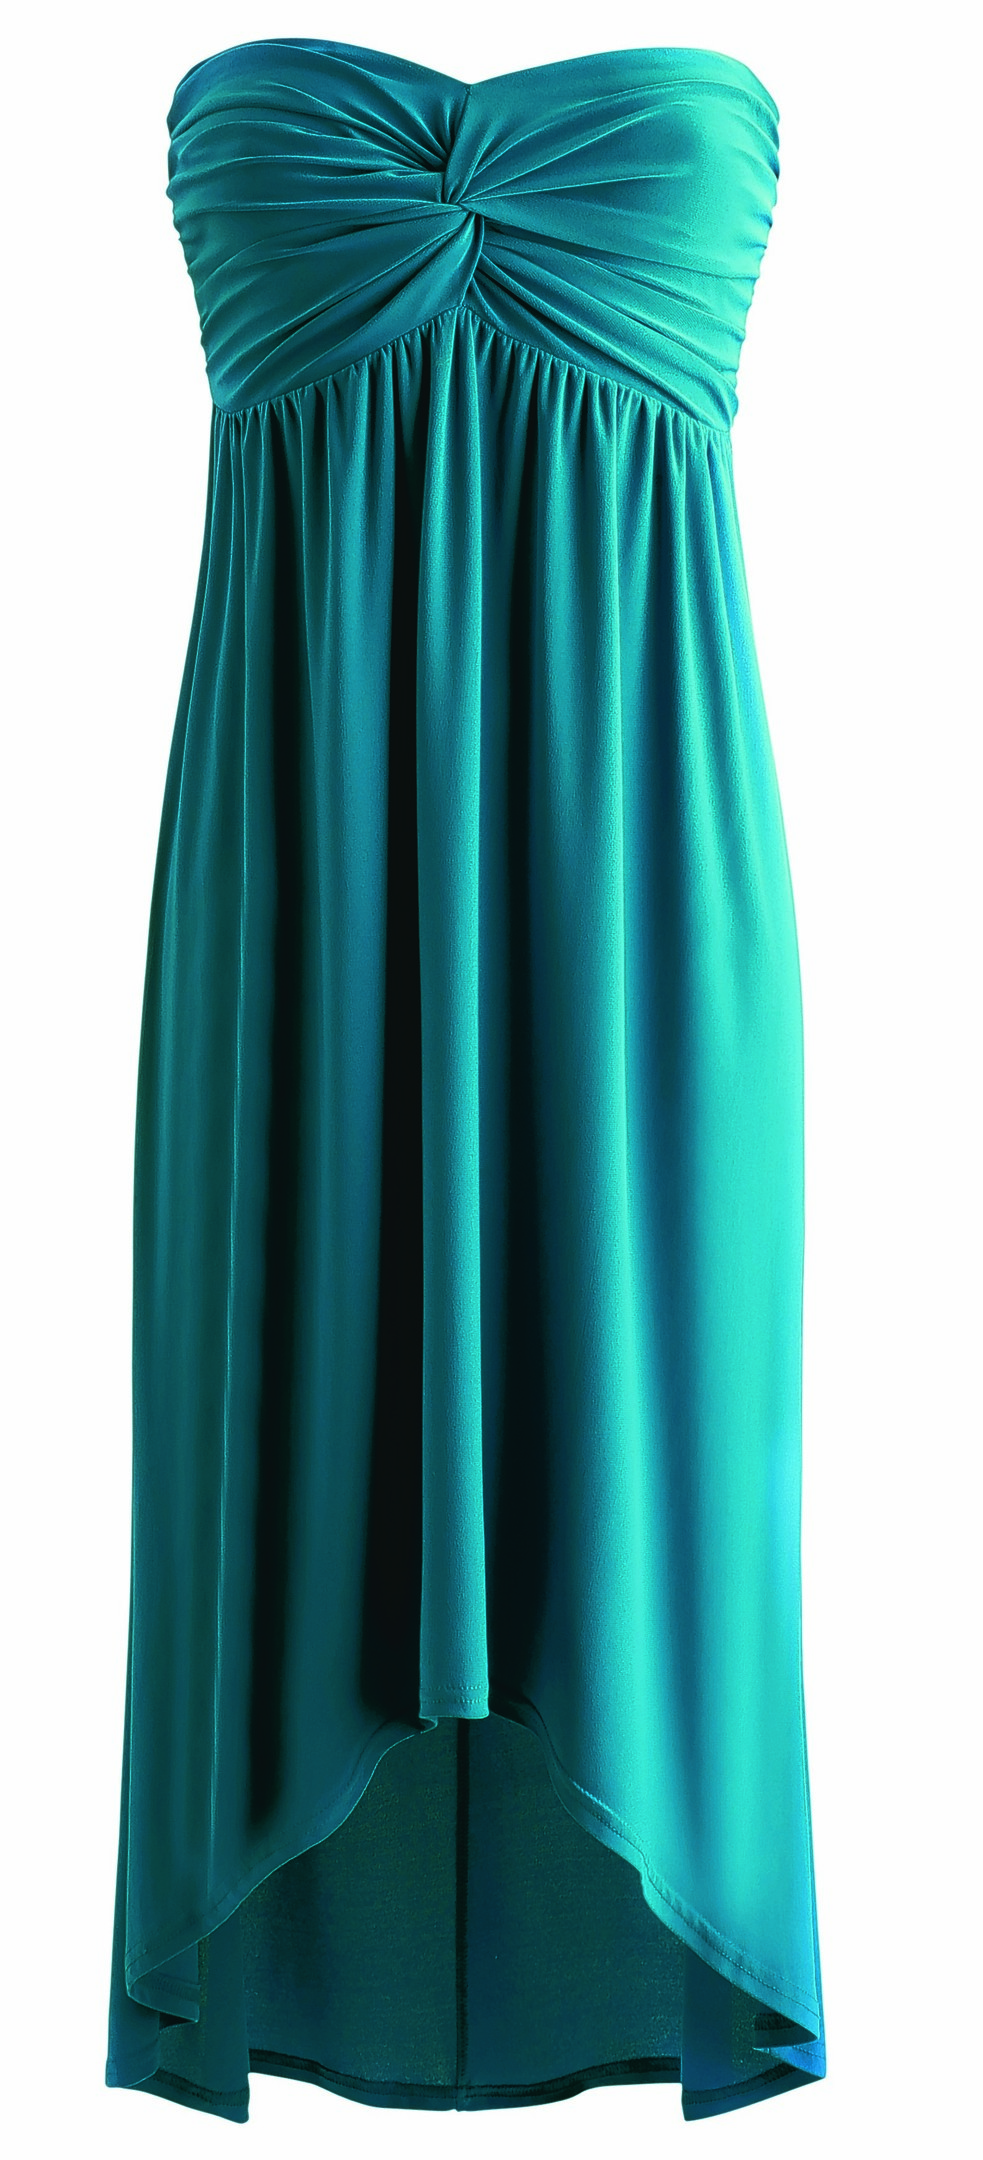 Strapless Knot Front High Low Hem Dress, currently reduced to £22 from £46 (www.fashionworld.co.uk)